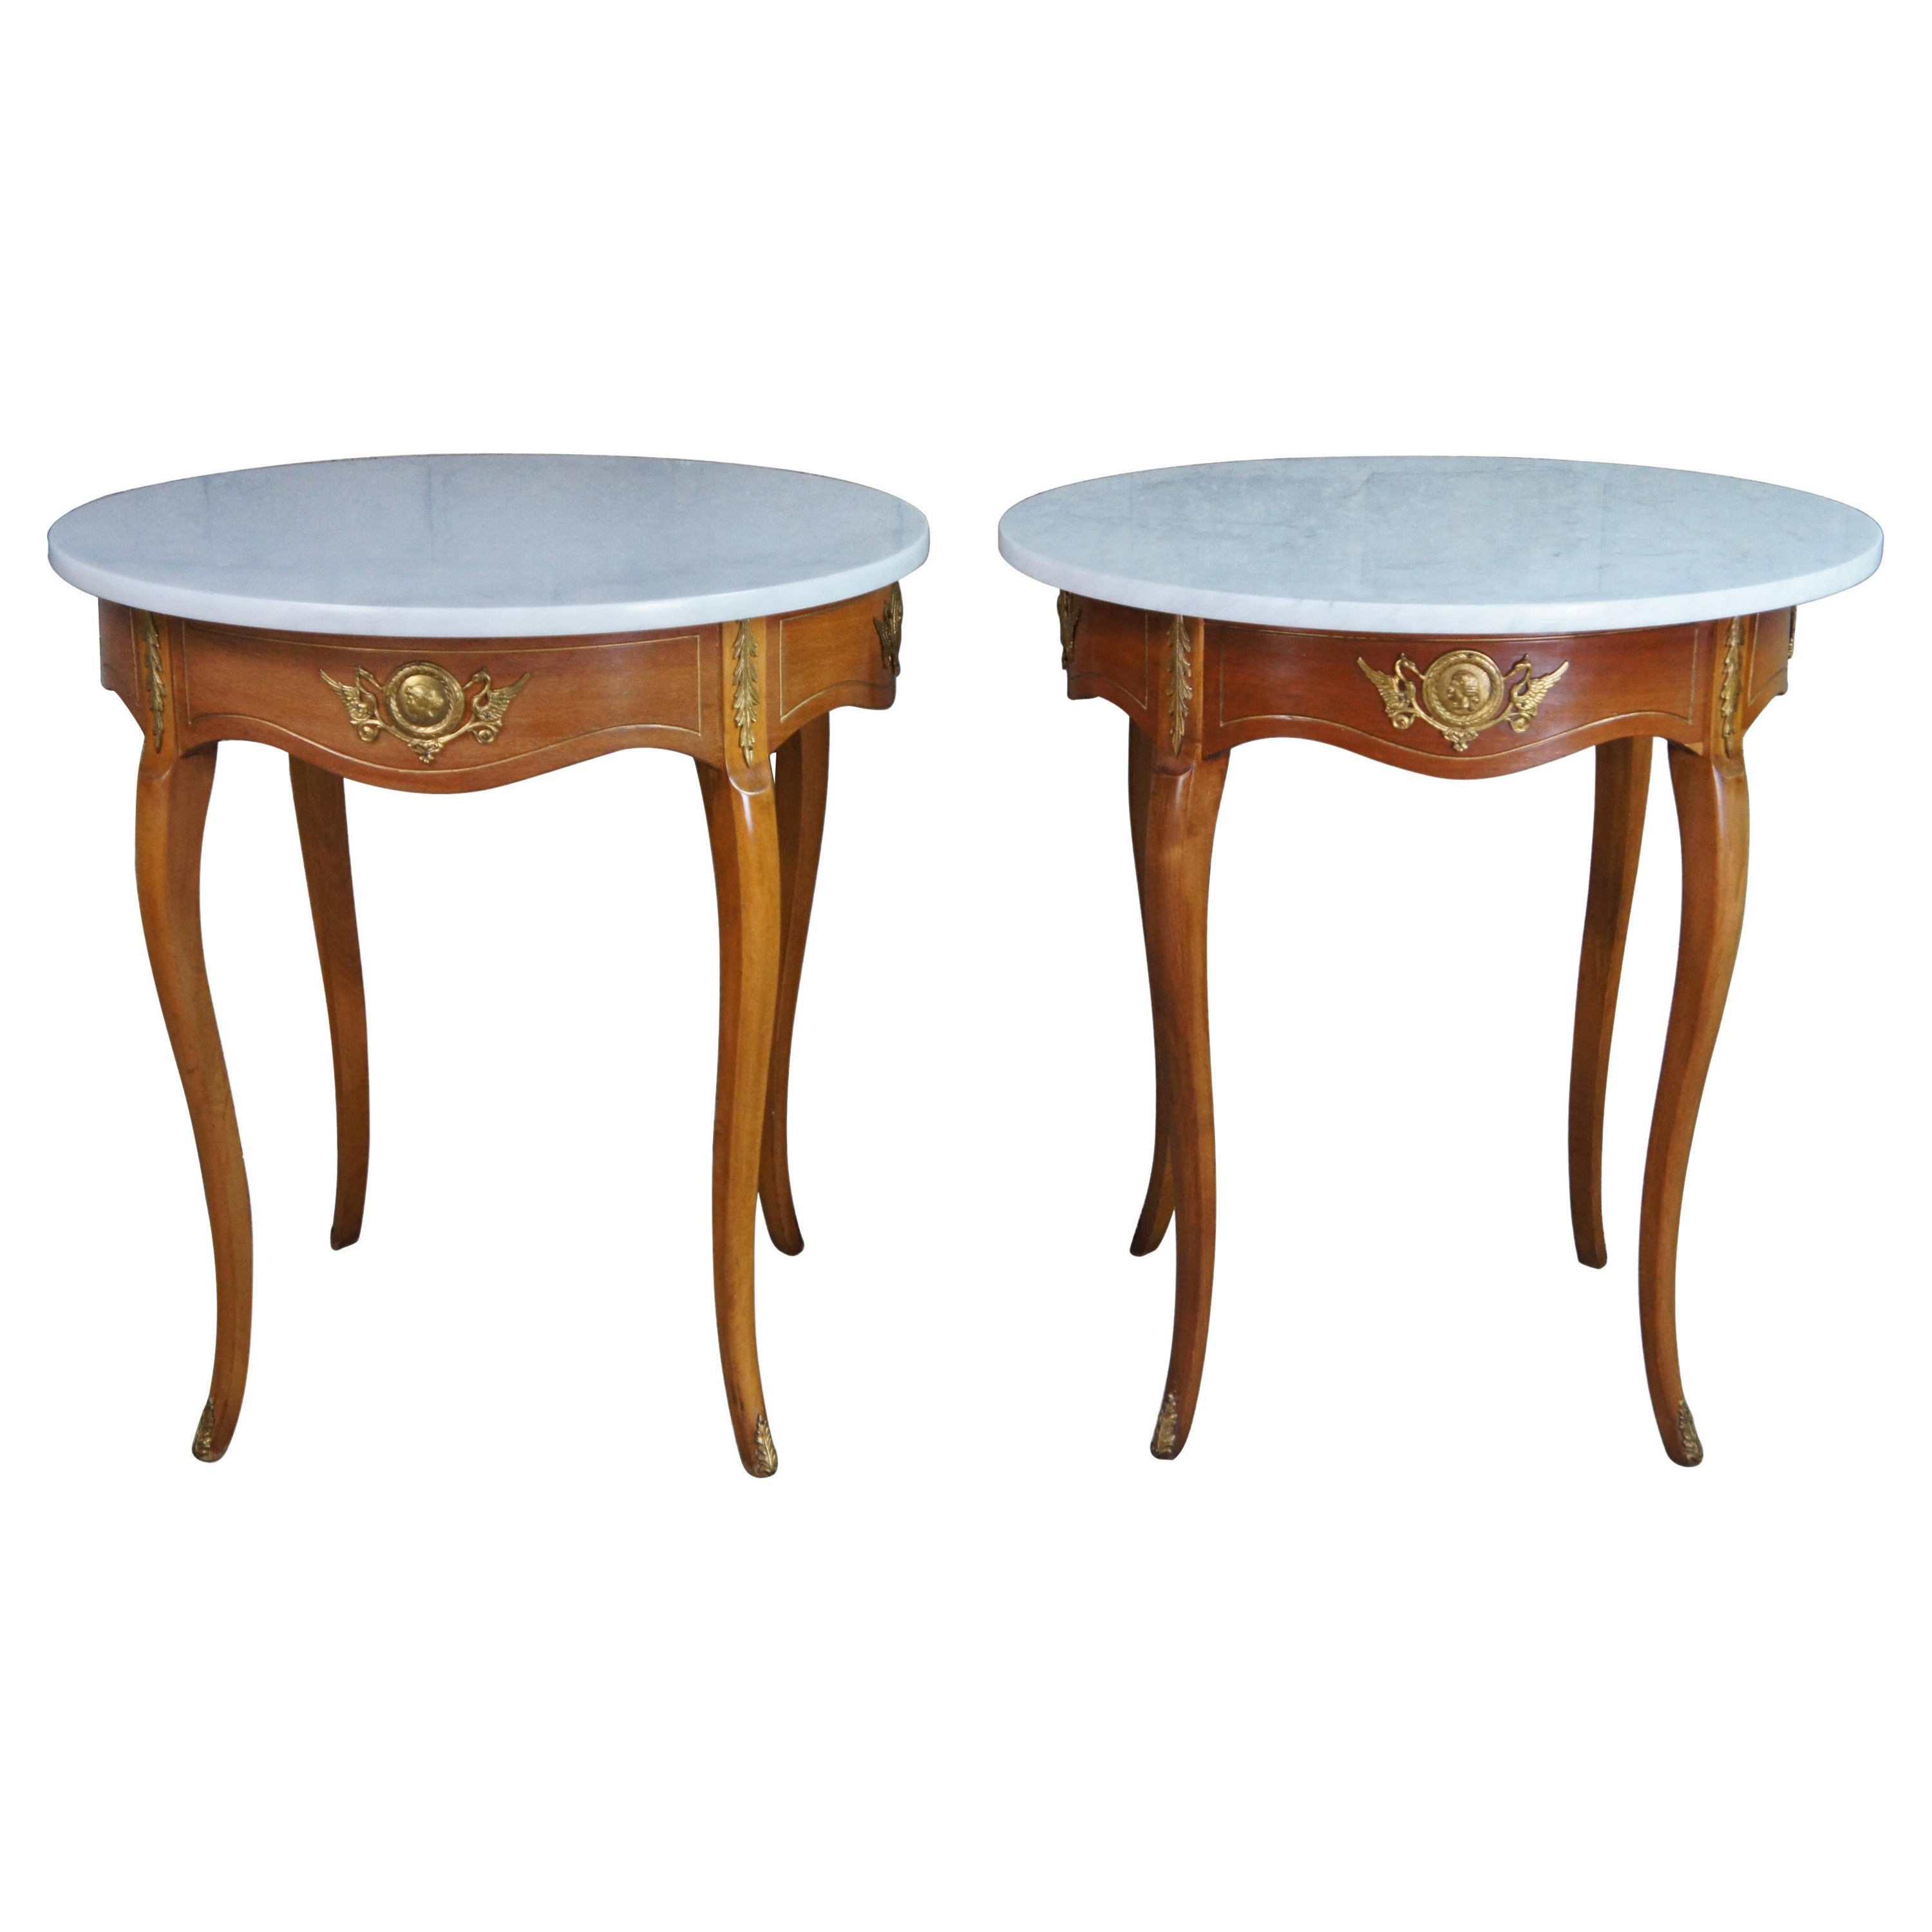 2 Antique Italian Neoclassical Round Marble Fruitwood Gueridon Accent End Tables For Sale